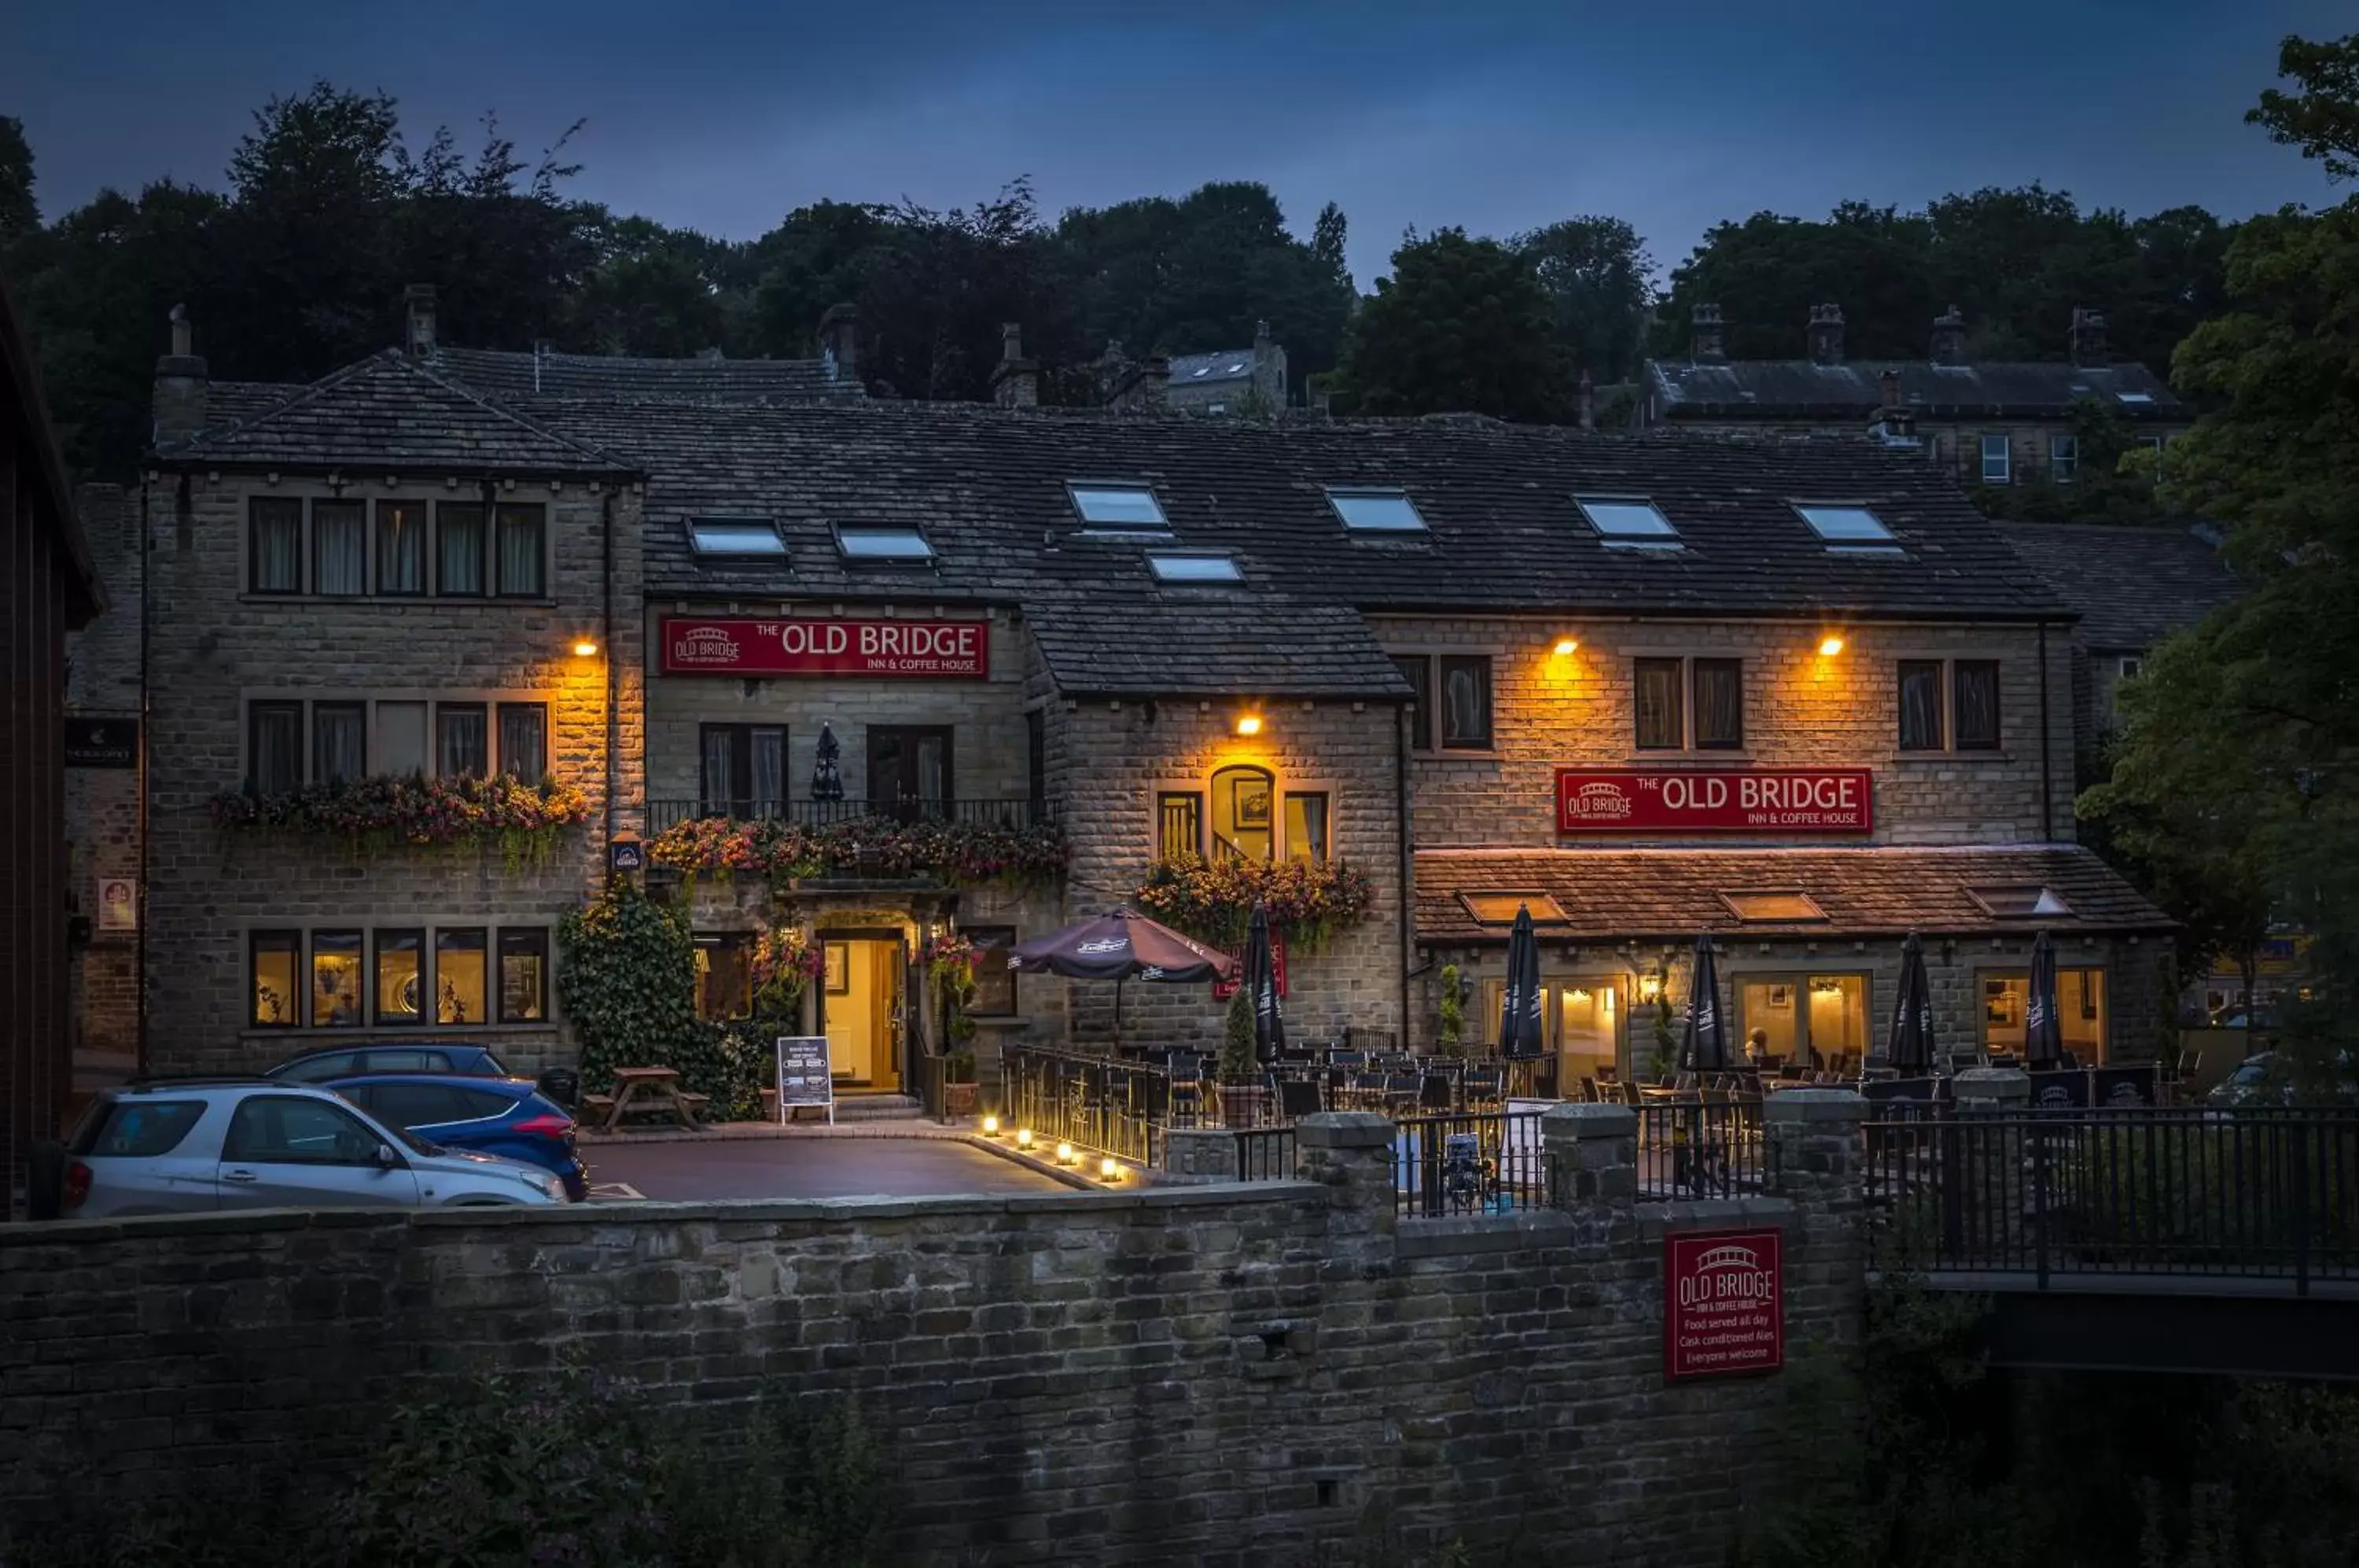 Facade/entrance, Property Building in The Old Bridge Inn, Holmfirth, West Yorkshire